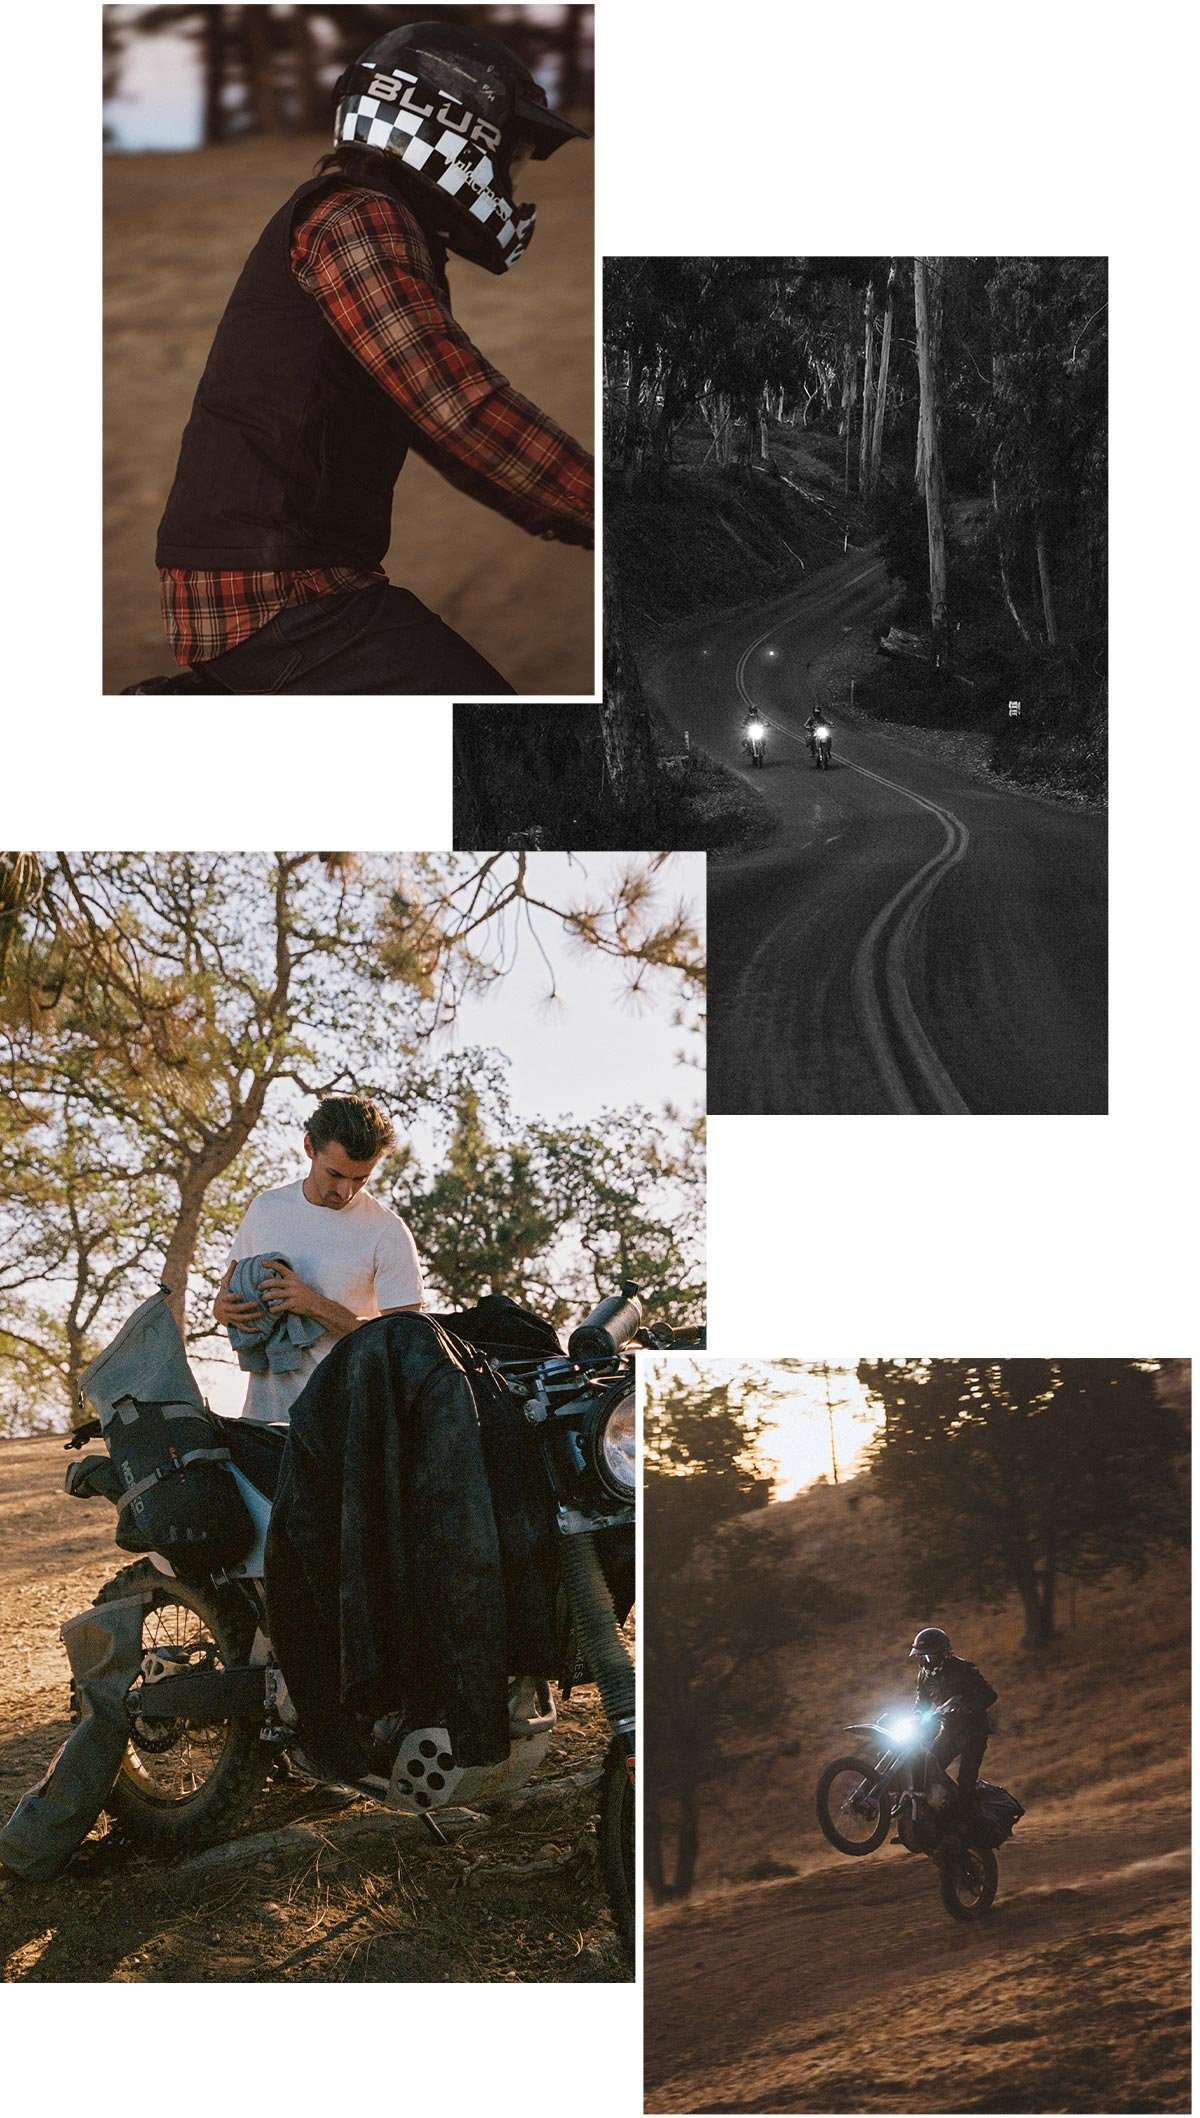 Editorial images for The Wilderness Collective